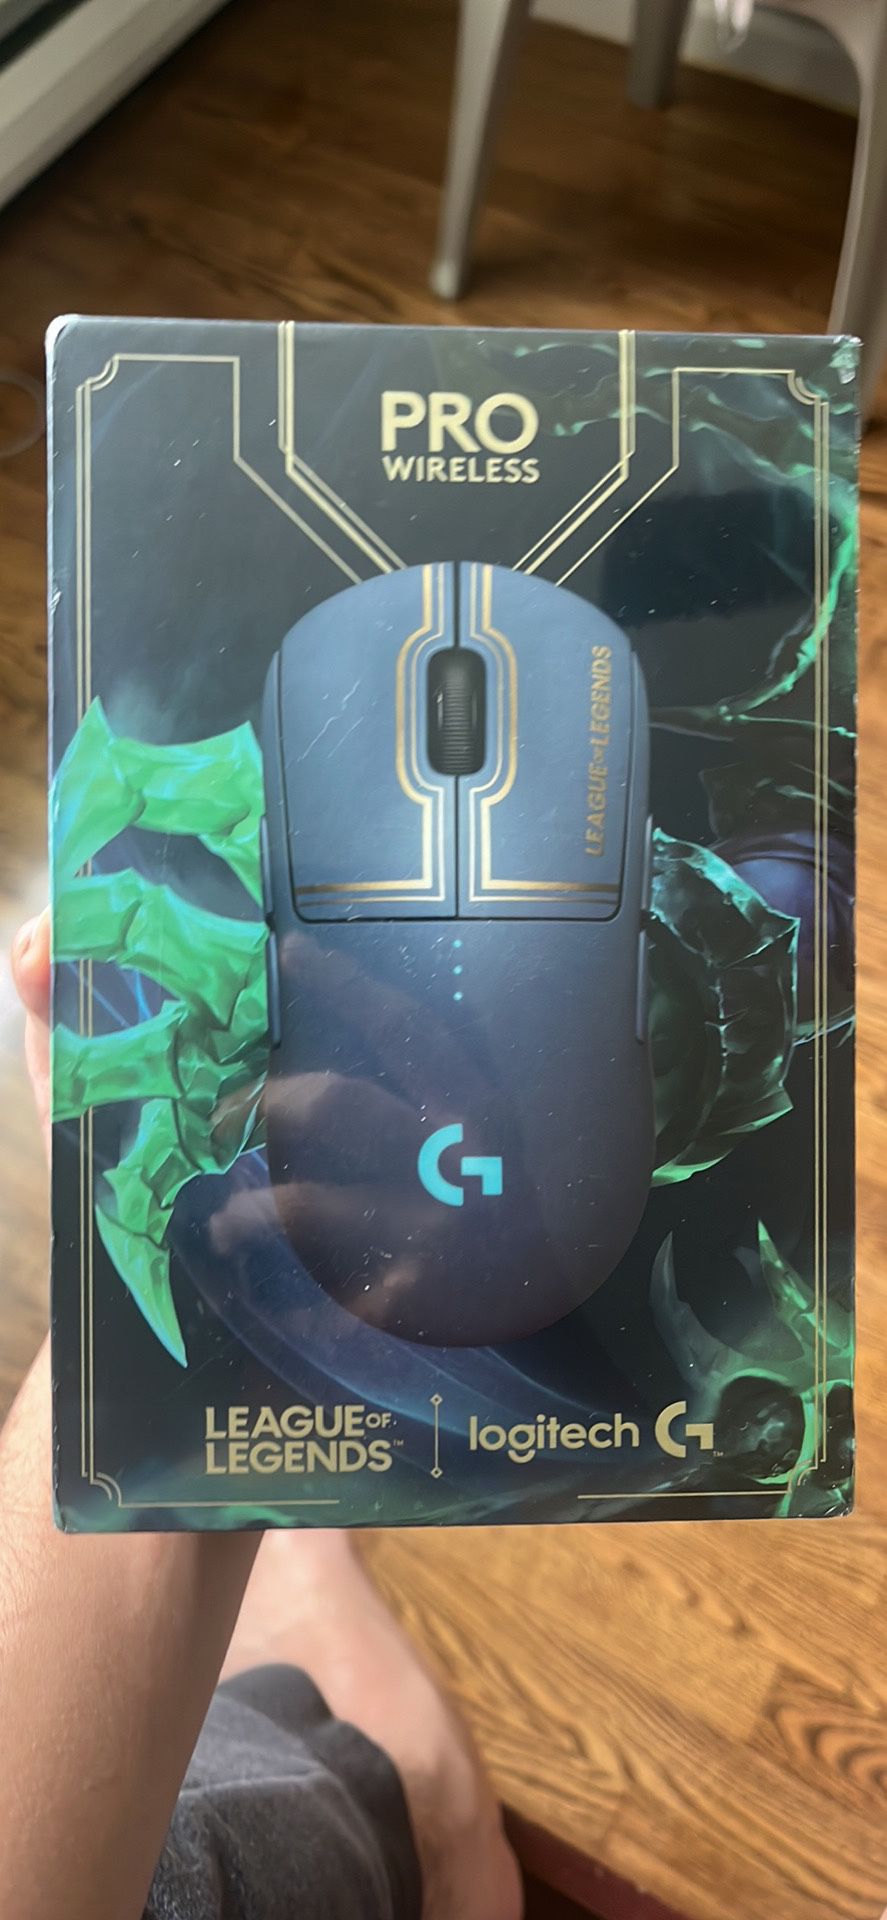 G Pro Wireless League of Legends (in plastic new) will trade for superlight